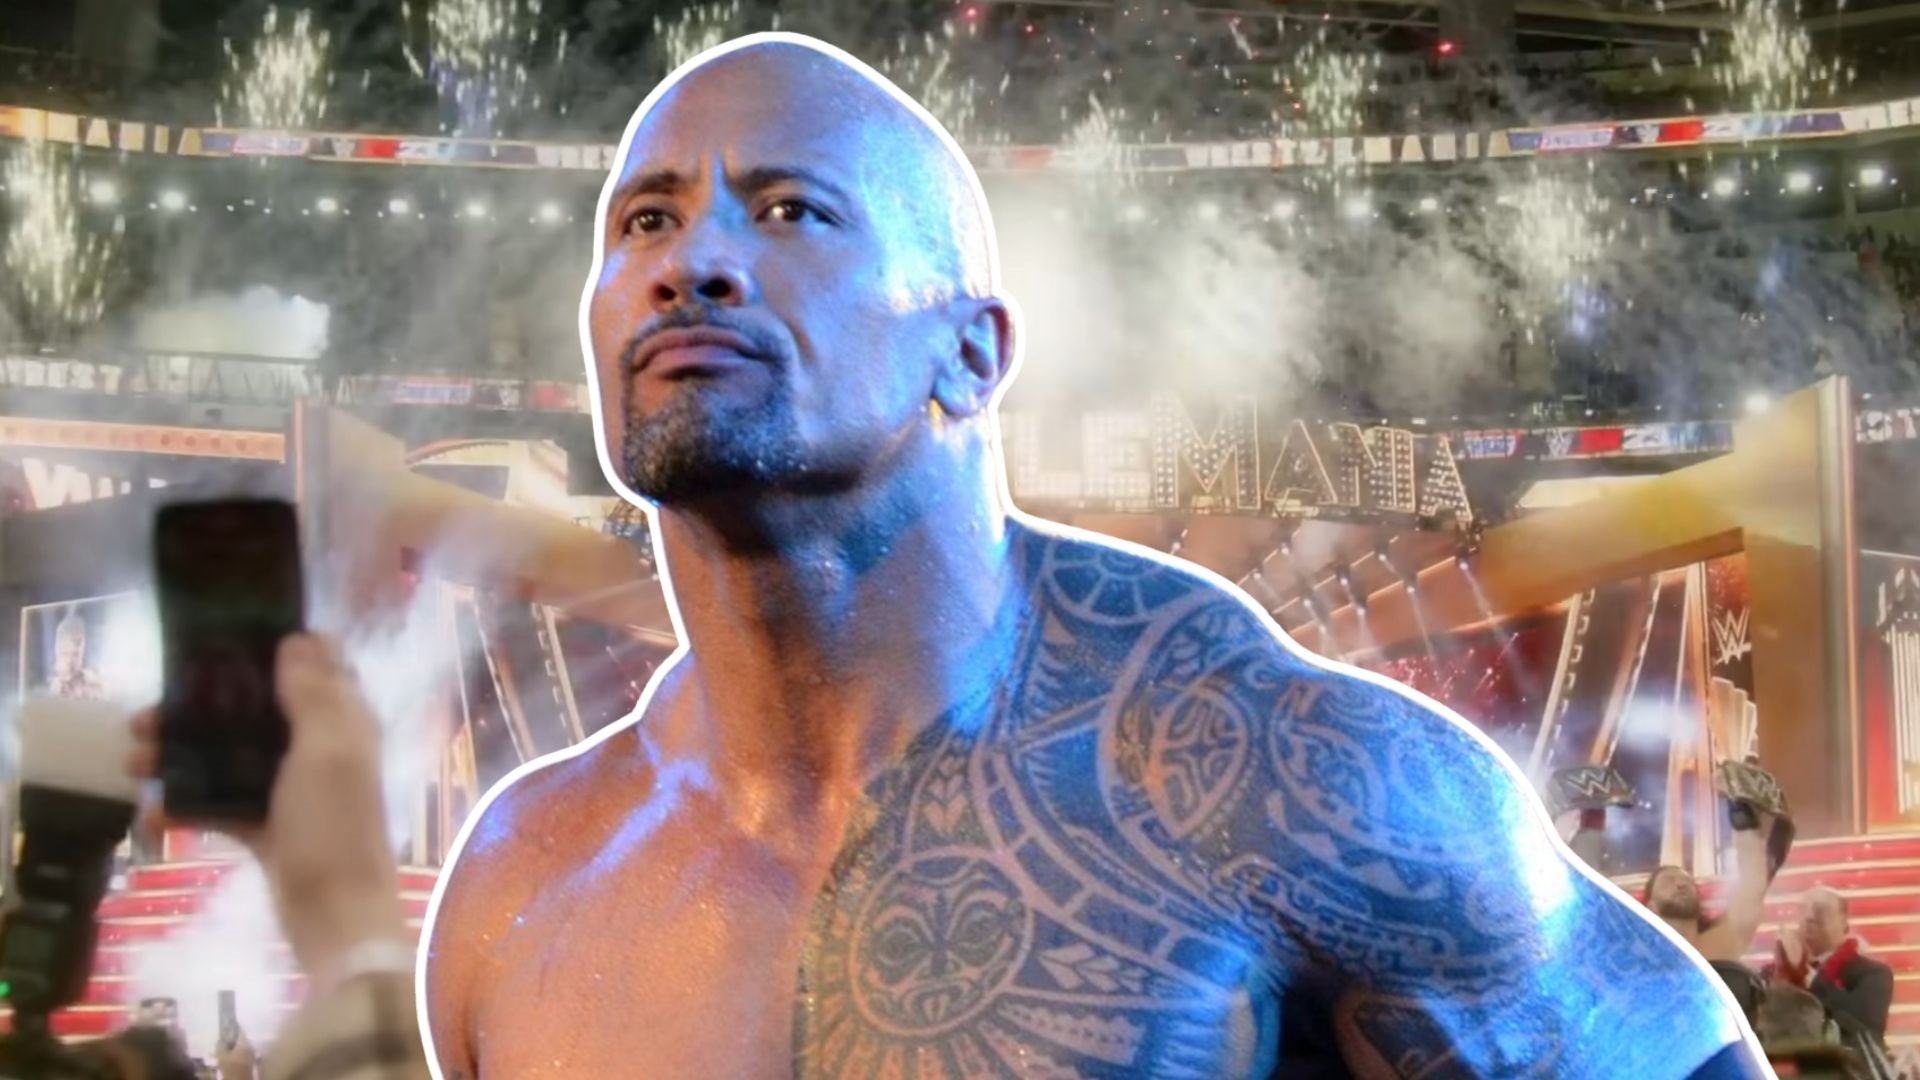 The Rock Going To Be at WrestleMania 40